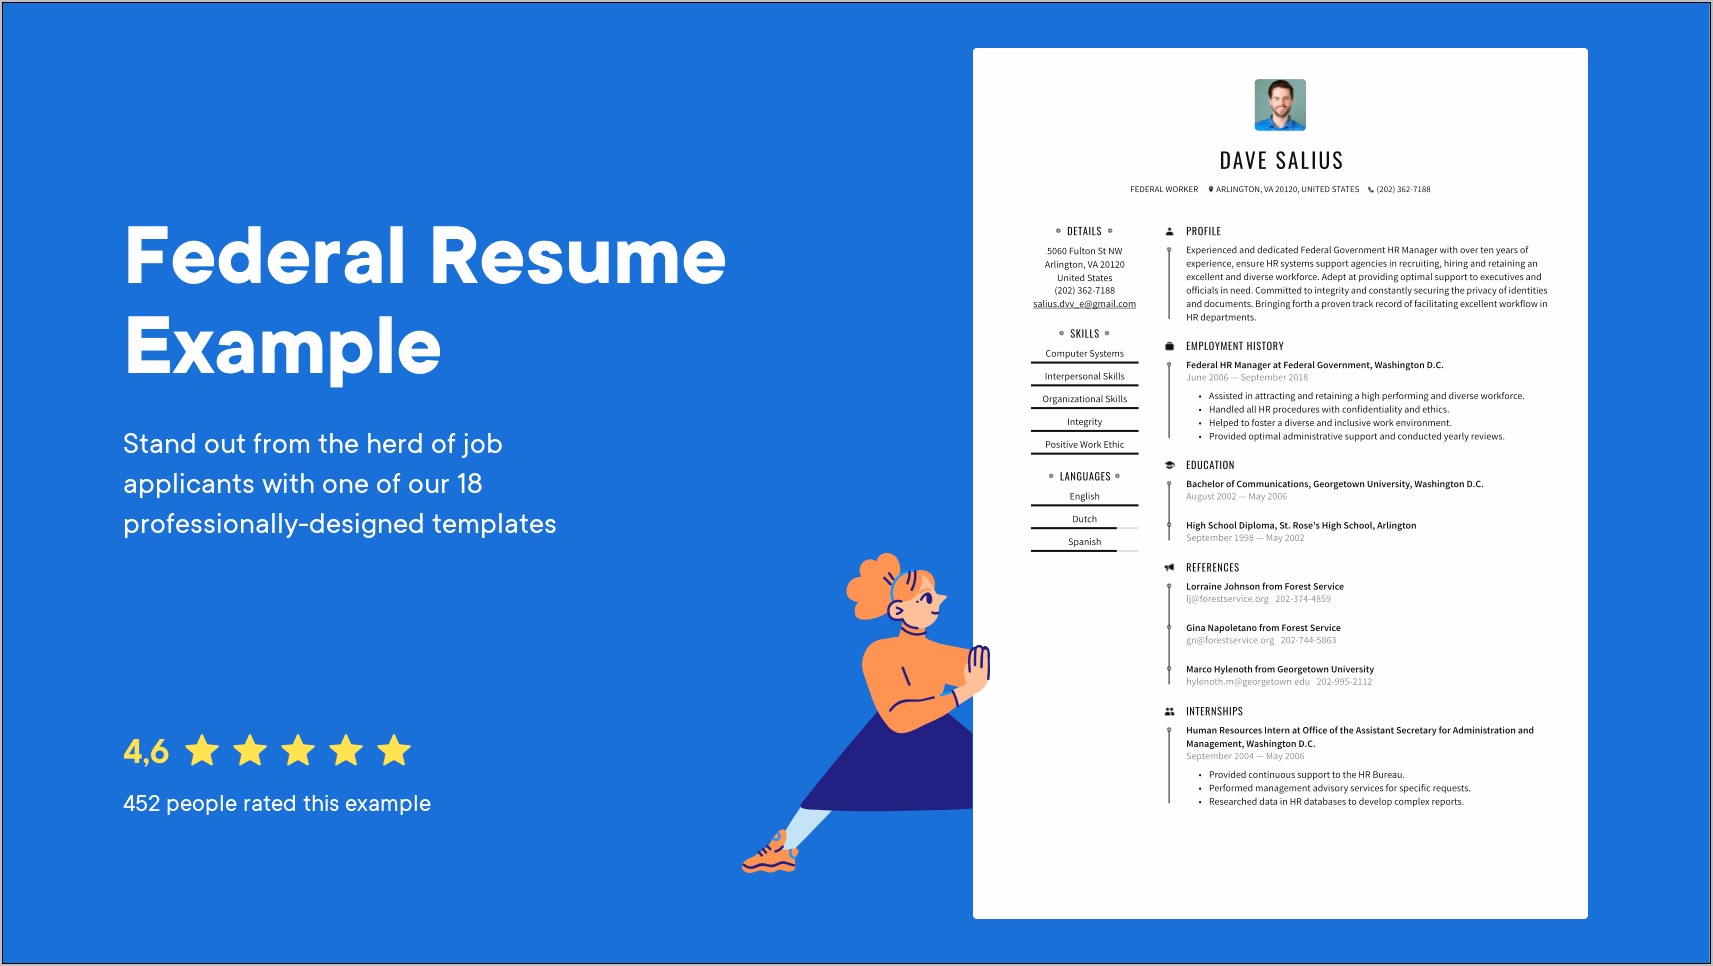 Resume Format For Local Government Jobs